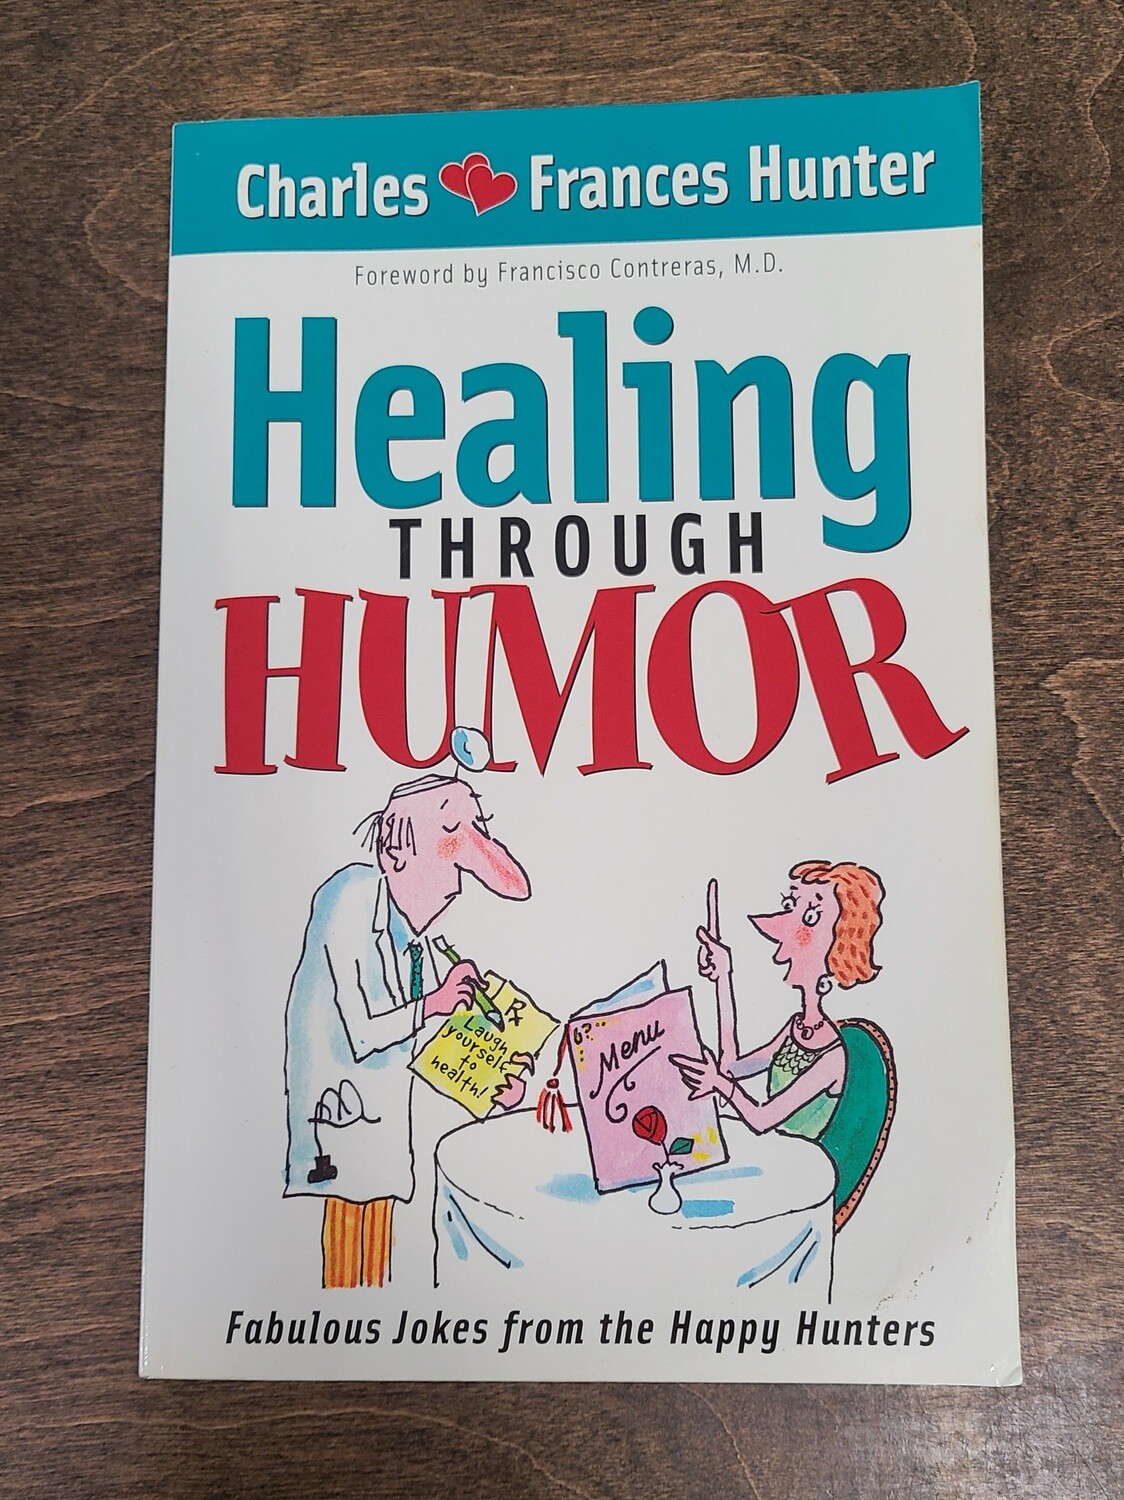 Healing Through Humor by Charles and Frances Hunter